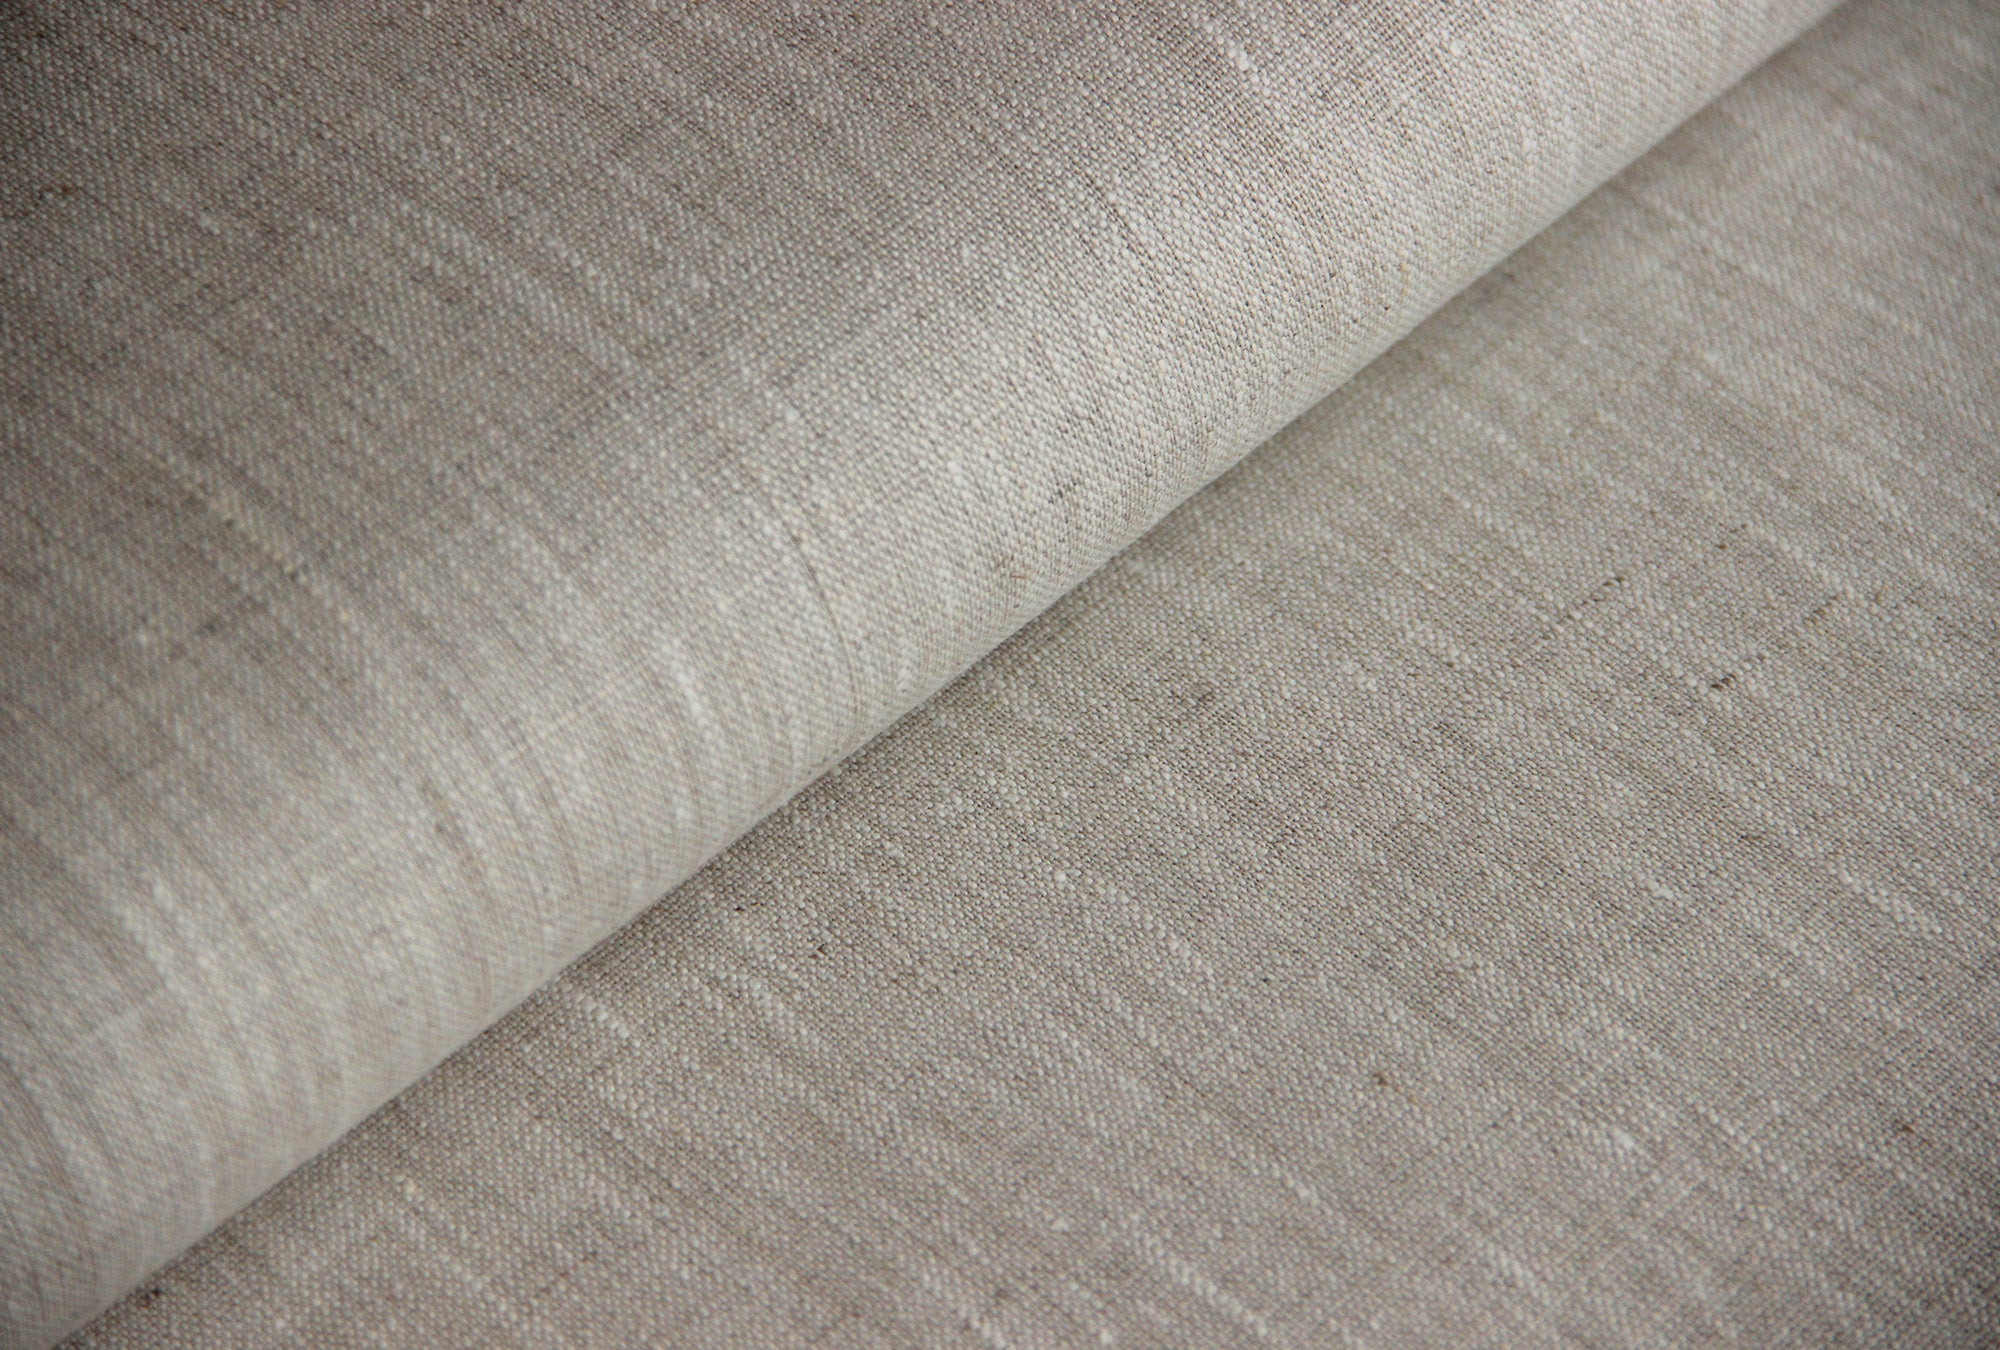 Linen Rustic - sold by the meter NATURAL fabric bleached 100% linen * 50 cm x 145 cm